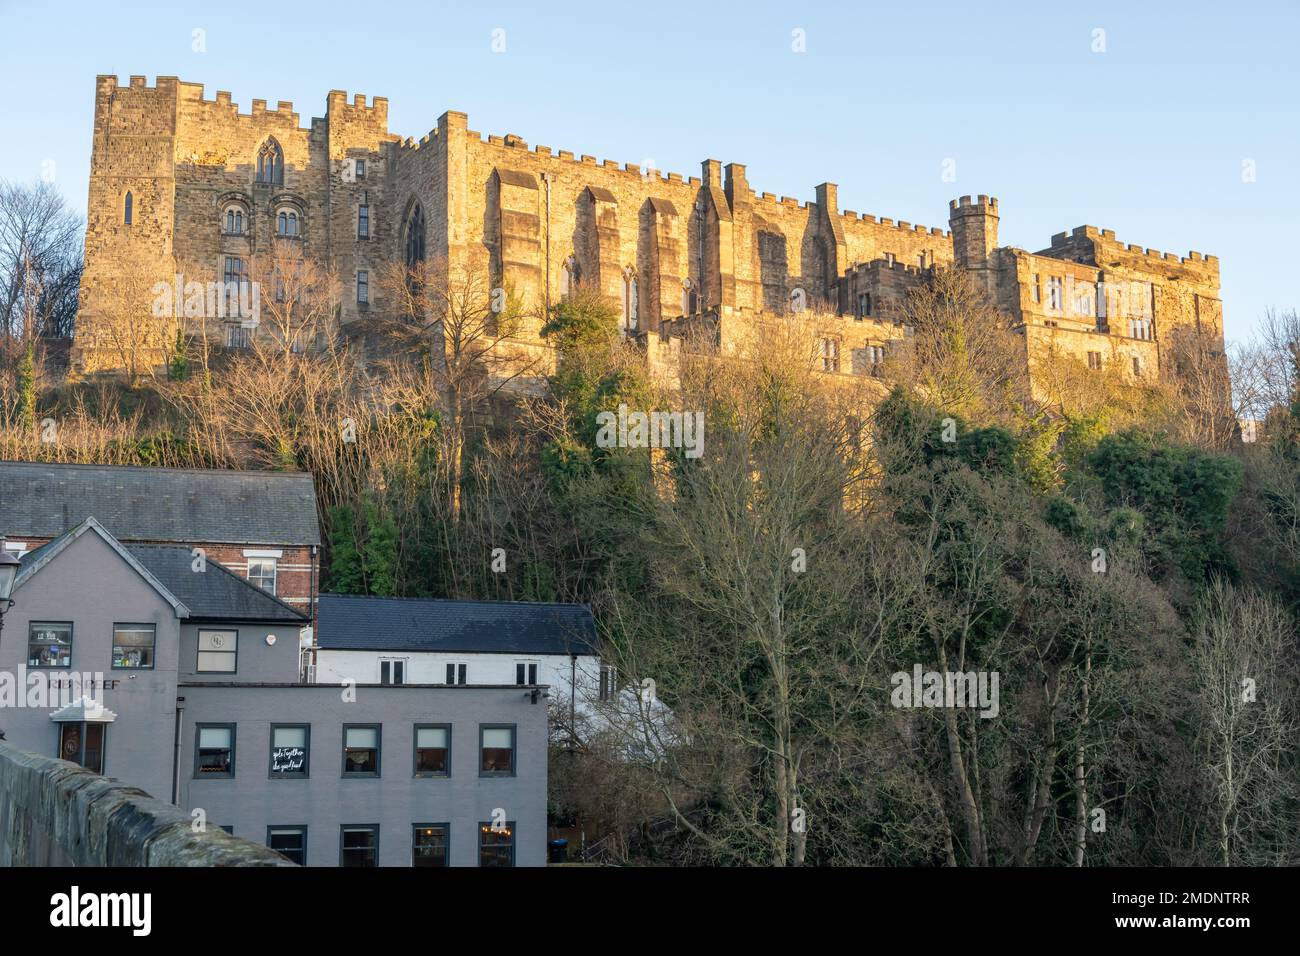 A view of Durham Castle from the city of Durham, County Durham, UK's Framwellgate Bridge. Stock Photo